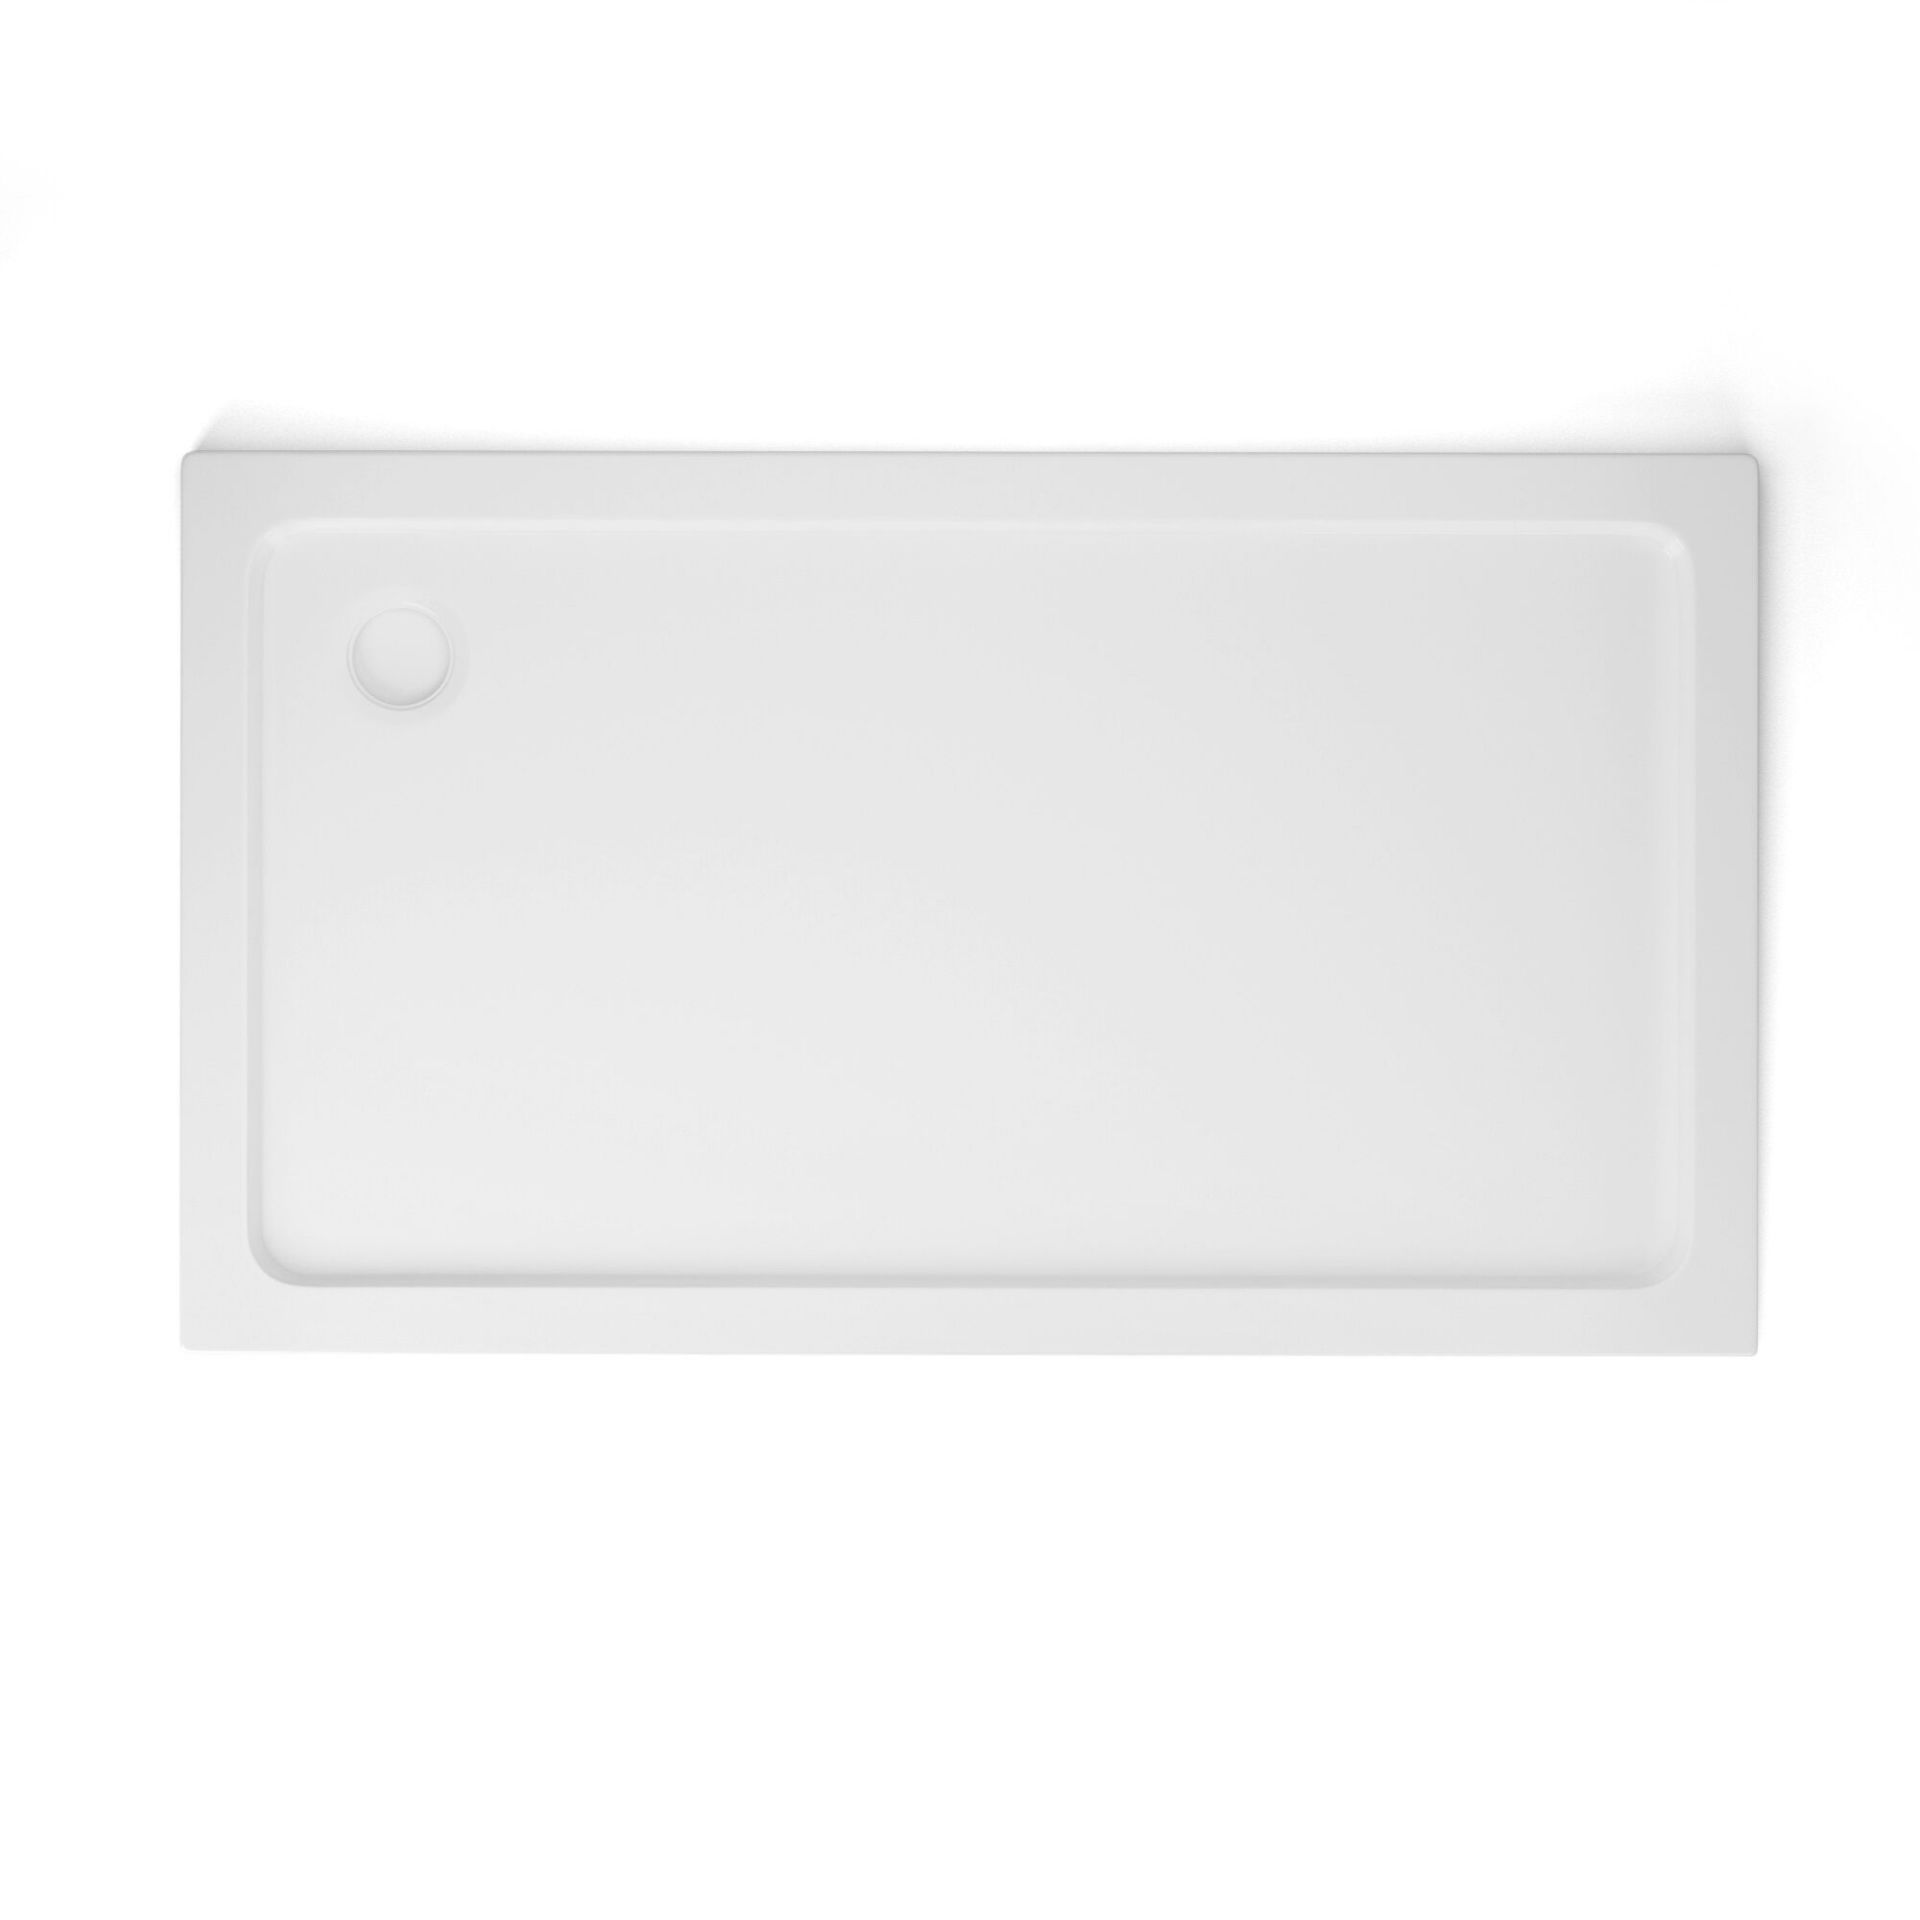 (KR77) 1400x800mm Rectangular Ultra Slim Stone Shower Tray. Constructed from acrylic capped stone